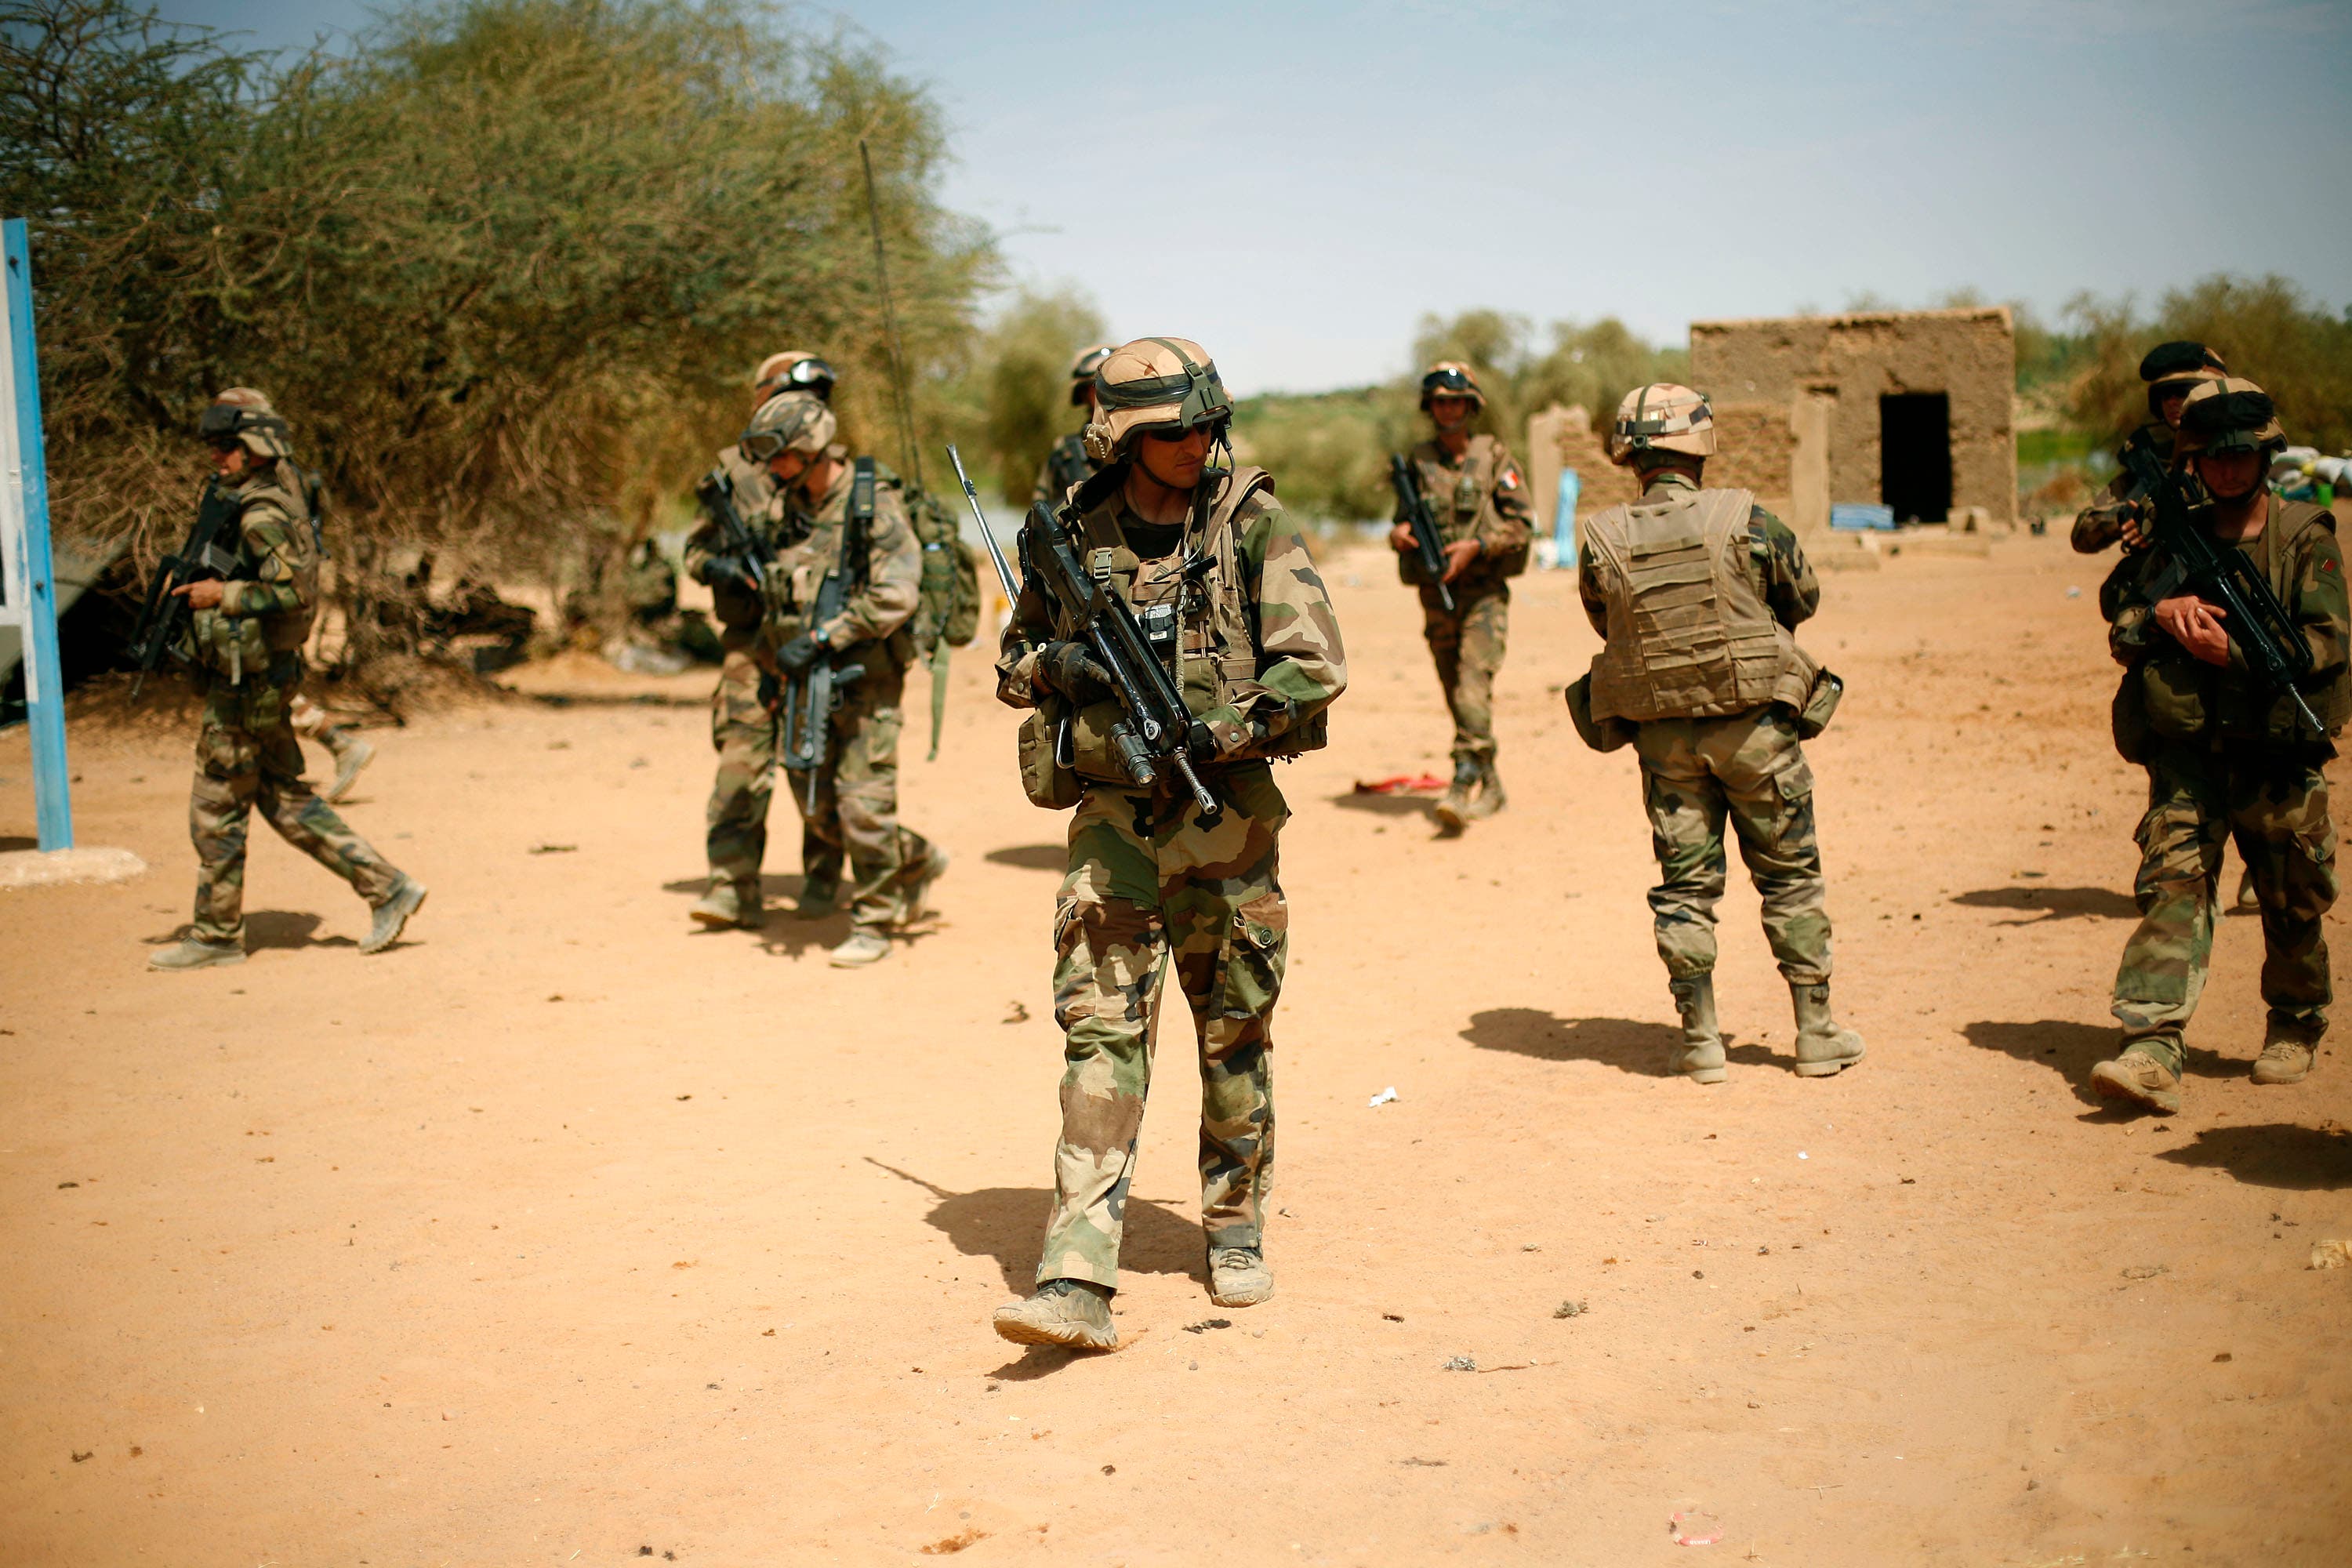 In this February 10, 2013 file photo, French soldiers secure the area where a suicide bomber attacked, at the entrance of Gao, northern Mali. (AP)